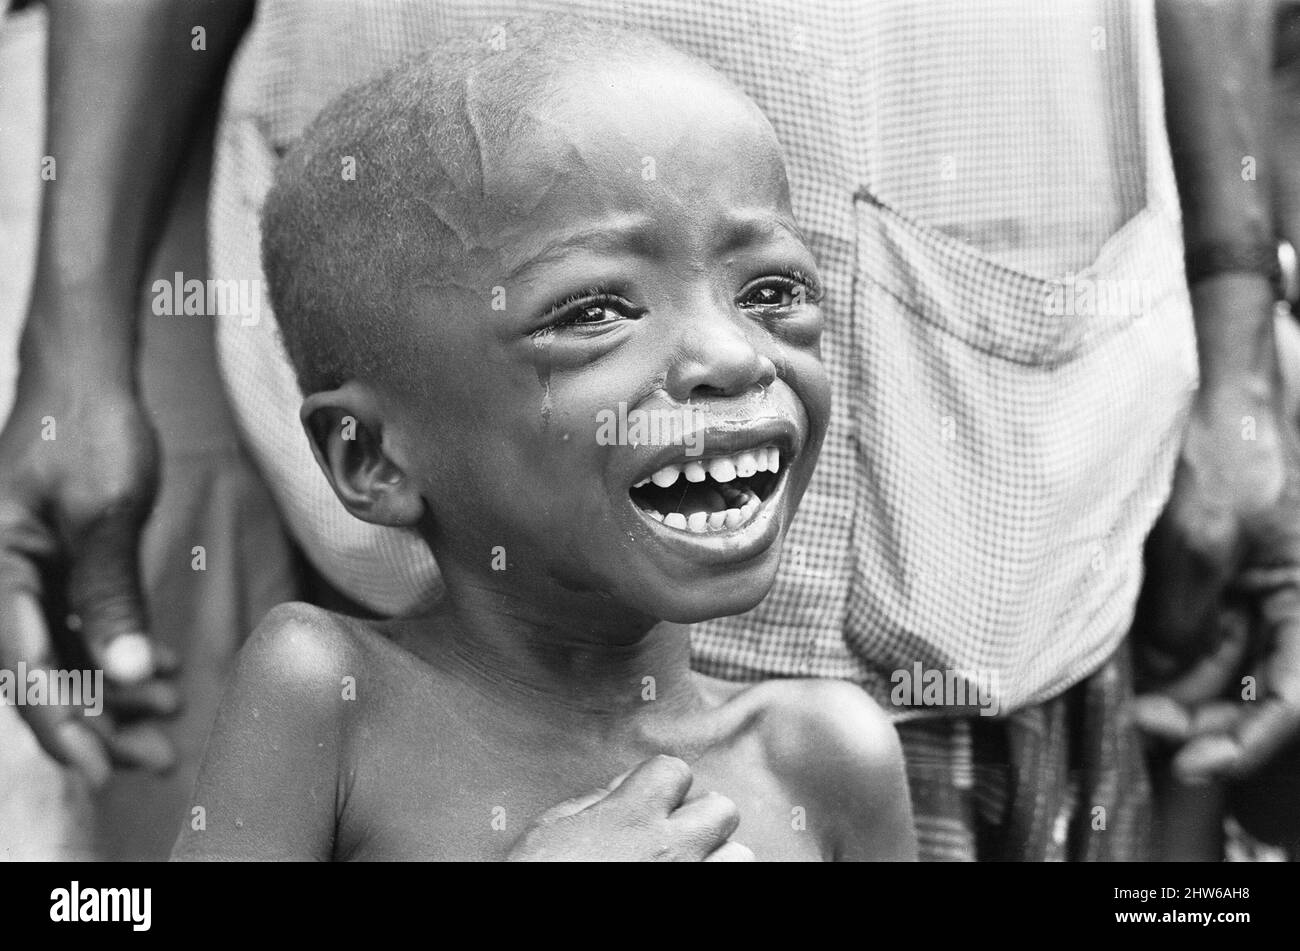 Starving child crying with hunger at the Queen Elizabeth Hospital, Umuahia just a few of the estimated one to two million victims of the Biafran War. 23rd June 1968The Nigerian Civil War, also known as the Biafran War endured for two and a half years, from  6 July 1967 to 15 January 1970, and was fought to counter the secession of Biafra from Nigeria. The indigenous Igbo people of Biafra felt they could no longer co-exist with the Northern-dominated federal government following independence from Great Britain. Political, economic, ethnic, cultural and religious tensions finally boiled over int Stock Photo